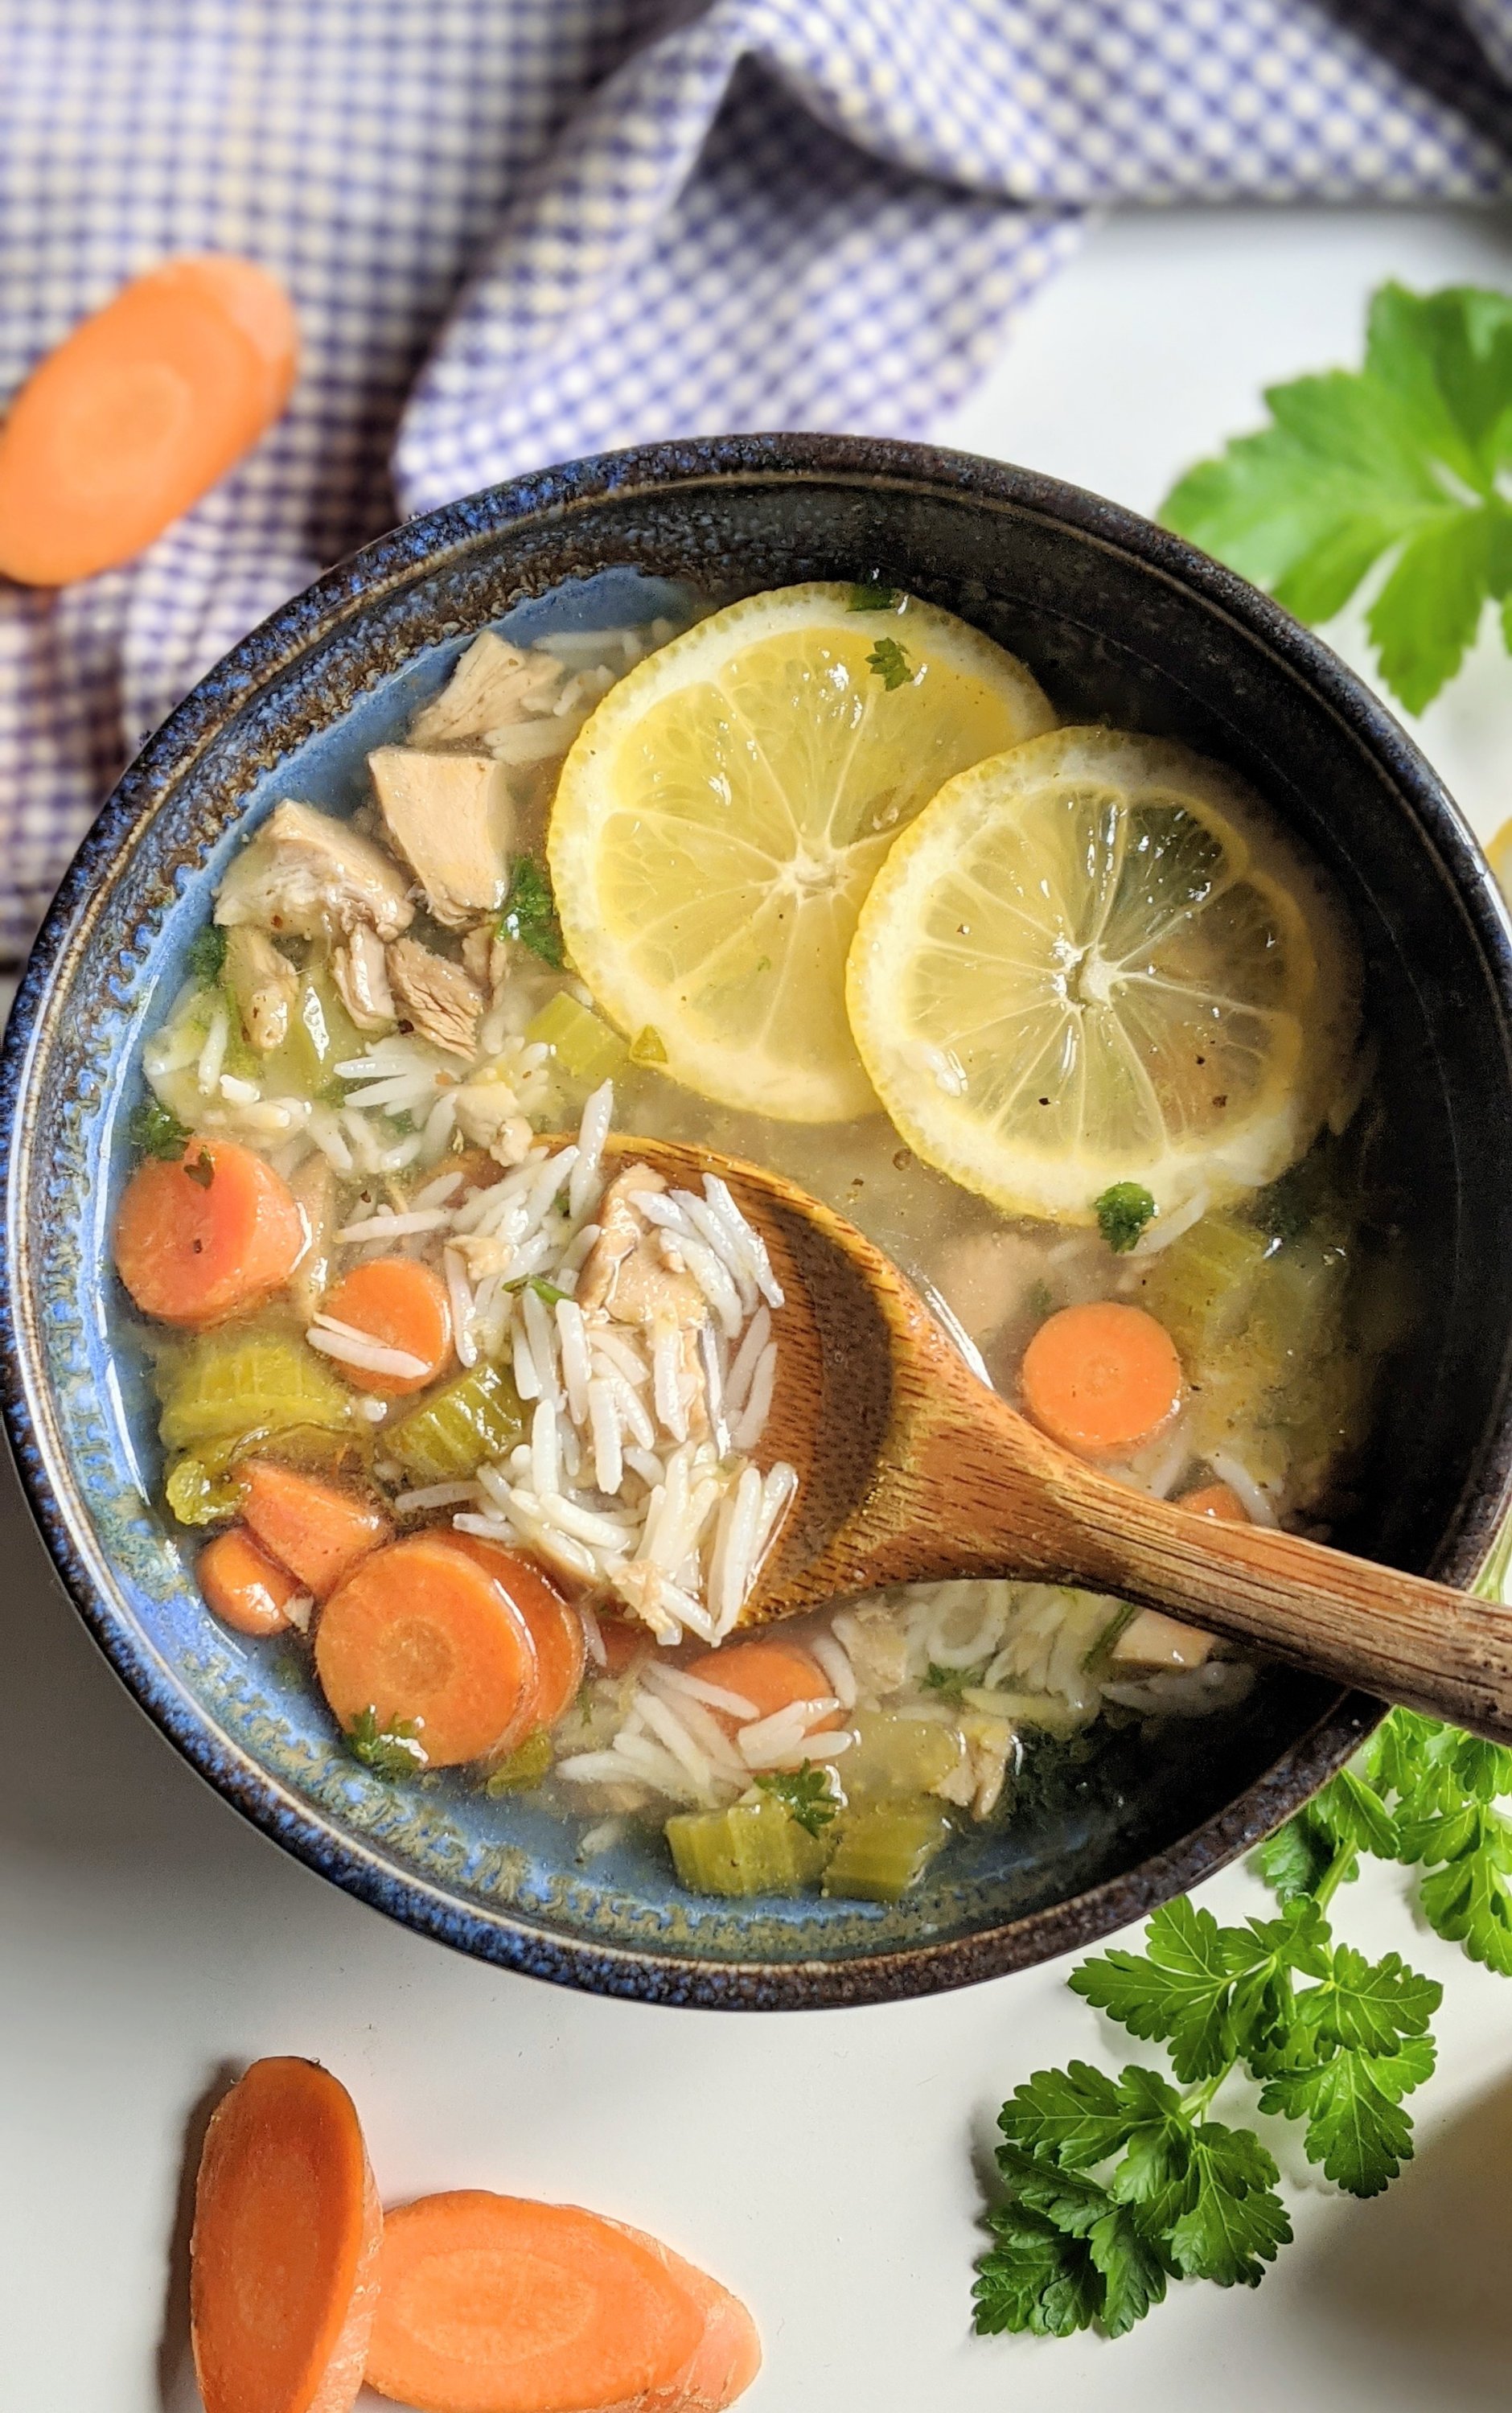 turkey lemon rice soup recipe with leftover turkey soups with old rice leftovers healthy gluten free turkey soups dairy free soups with cooked turkey one pot soup recipes healthy